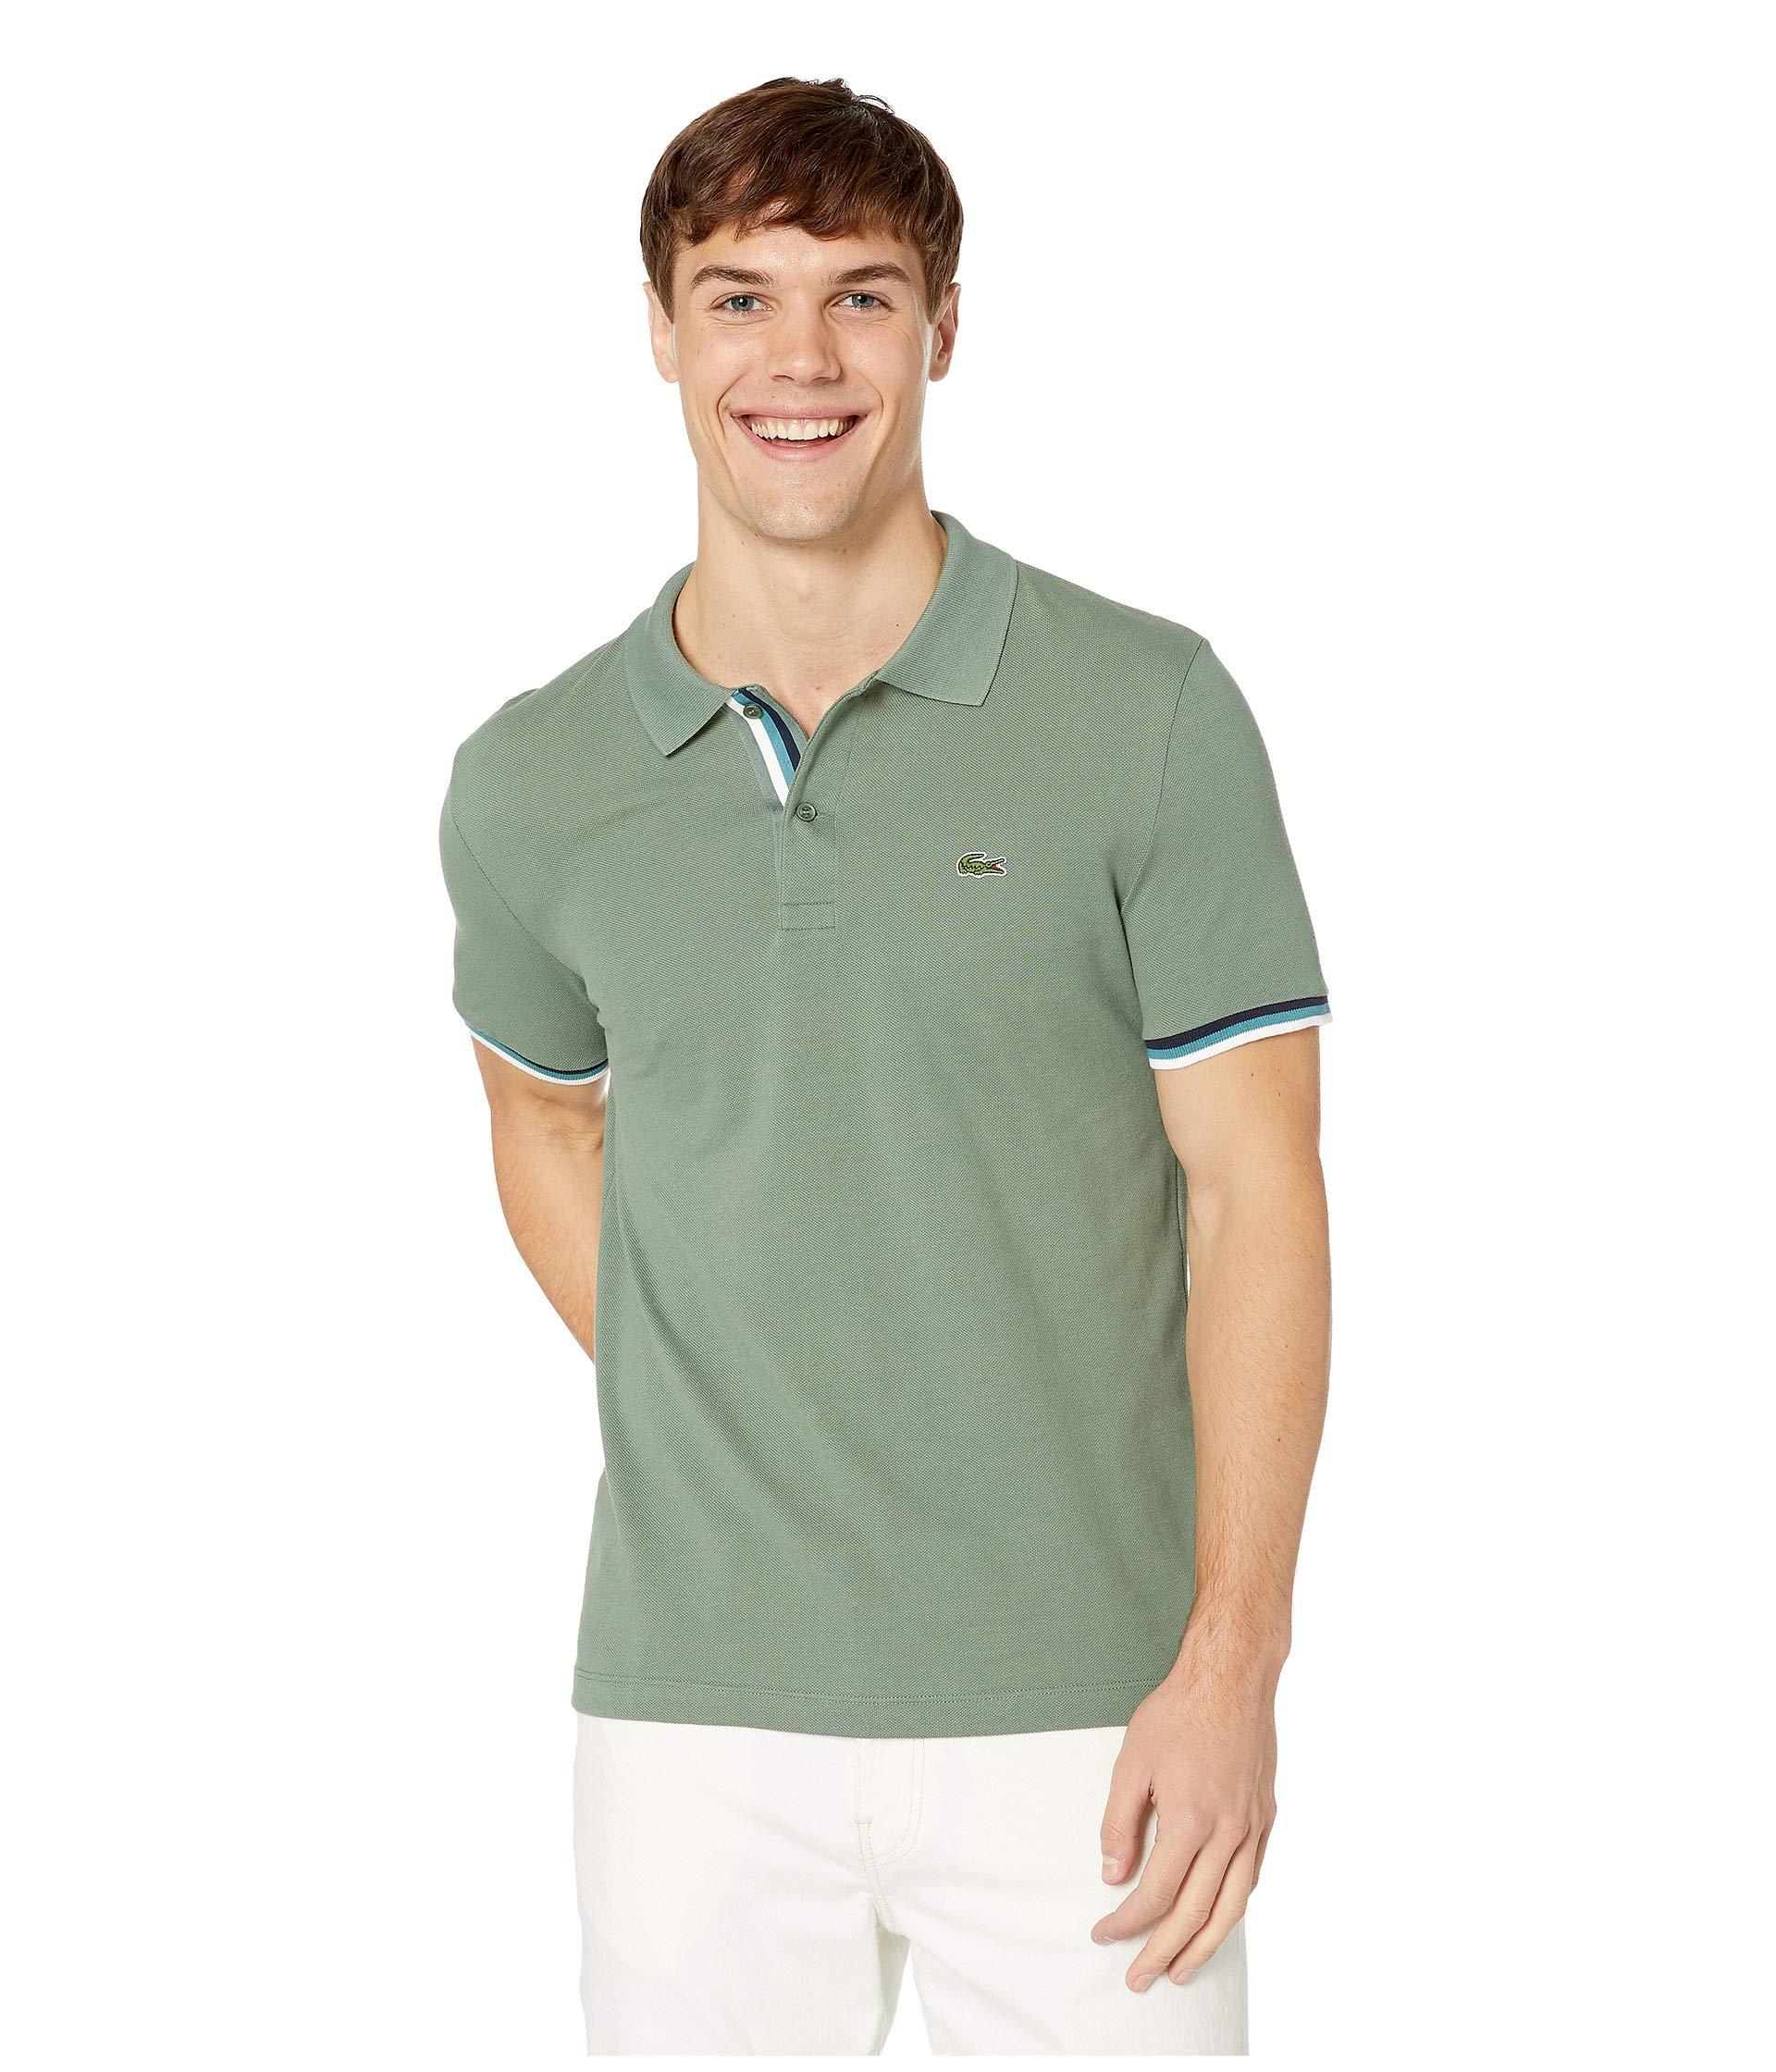 Download Lacoste Cotton Short Sleeve 2 Ply Pique Slim Fit Striped ...